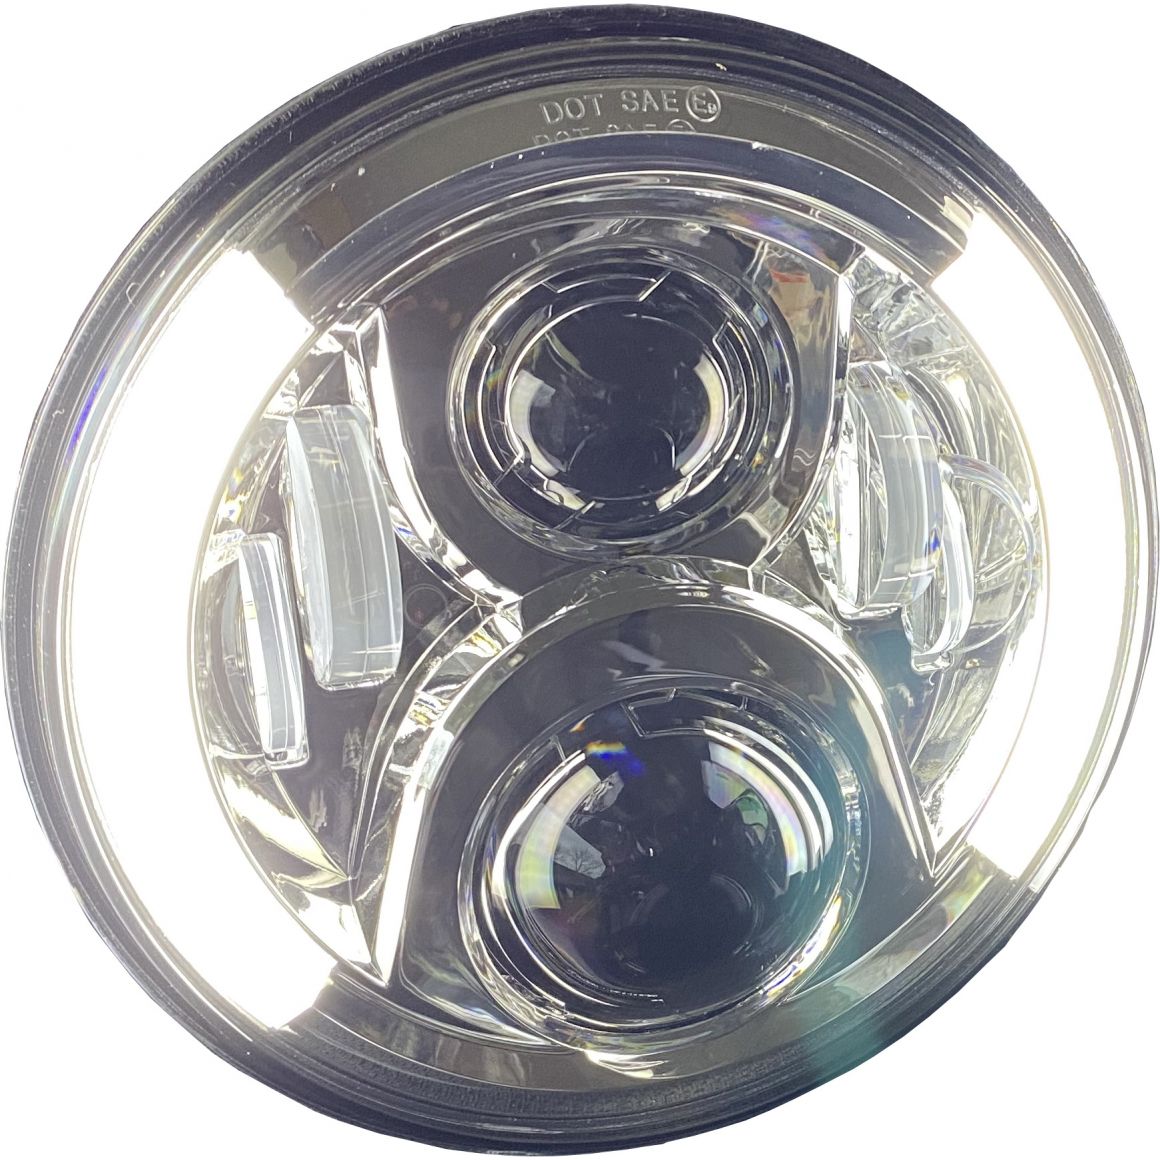 Phare LED 7 pouces 55W - REMMOTORCYCLE